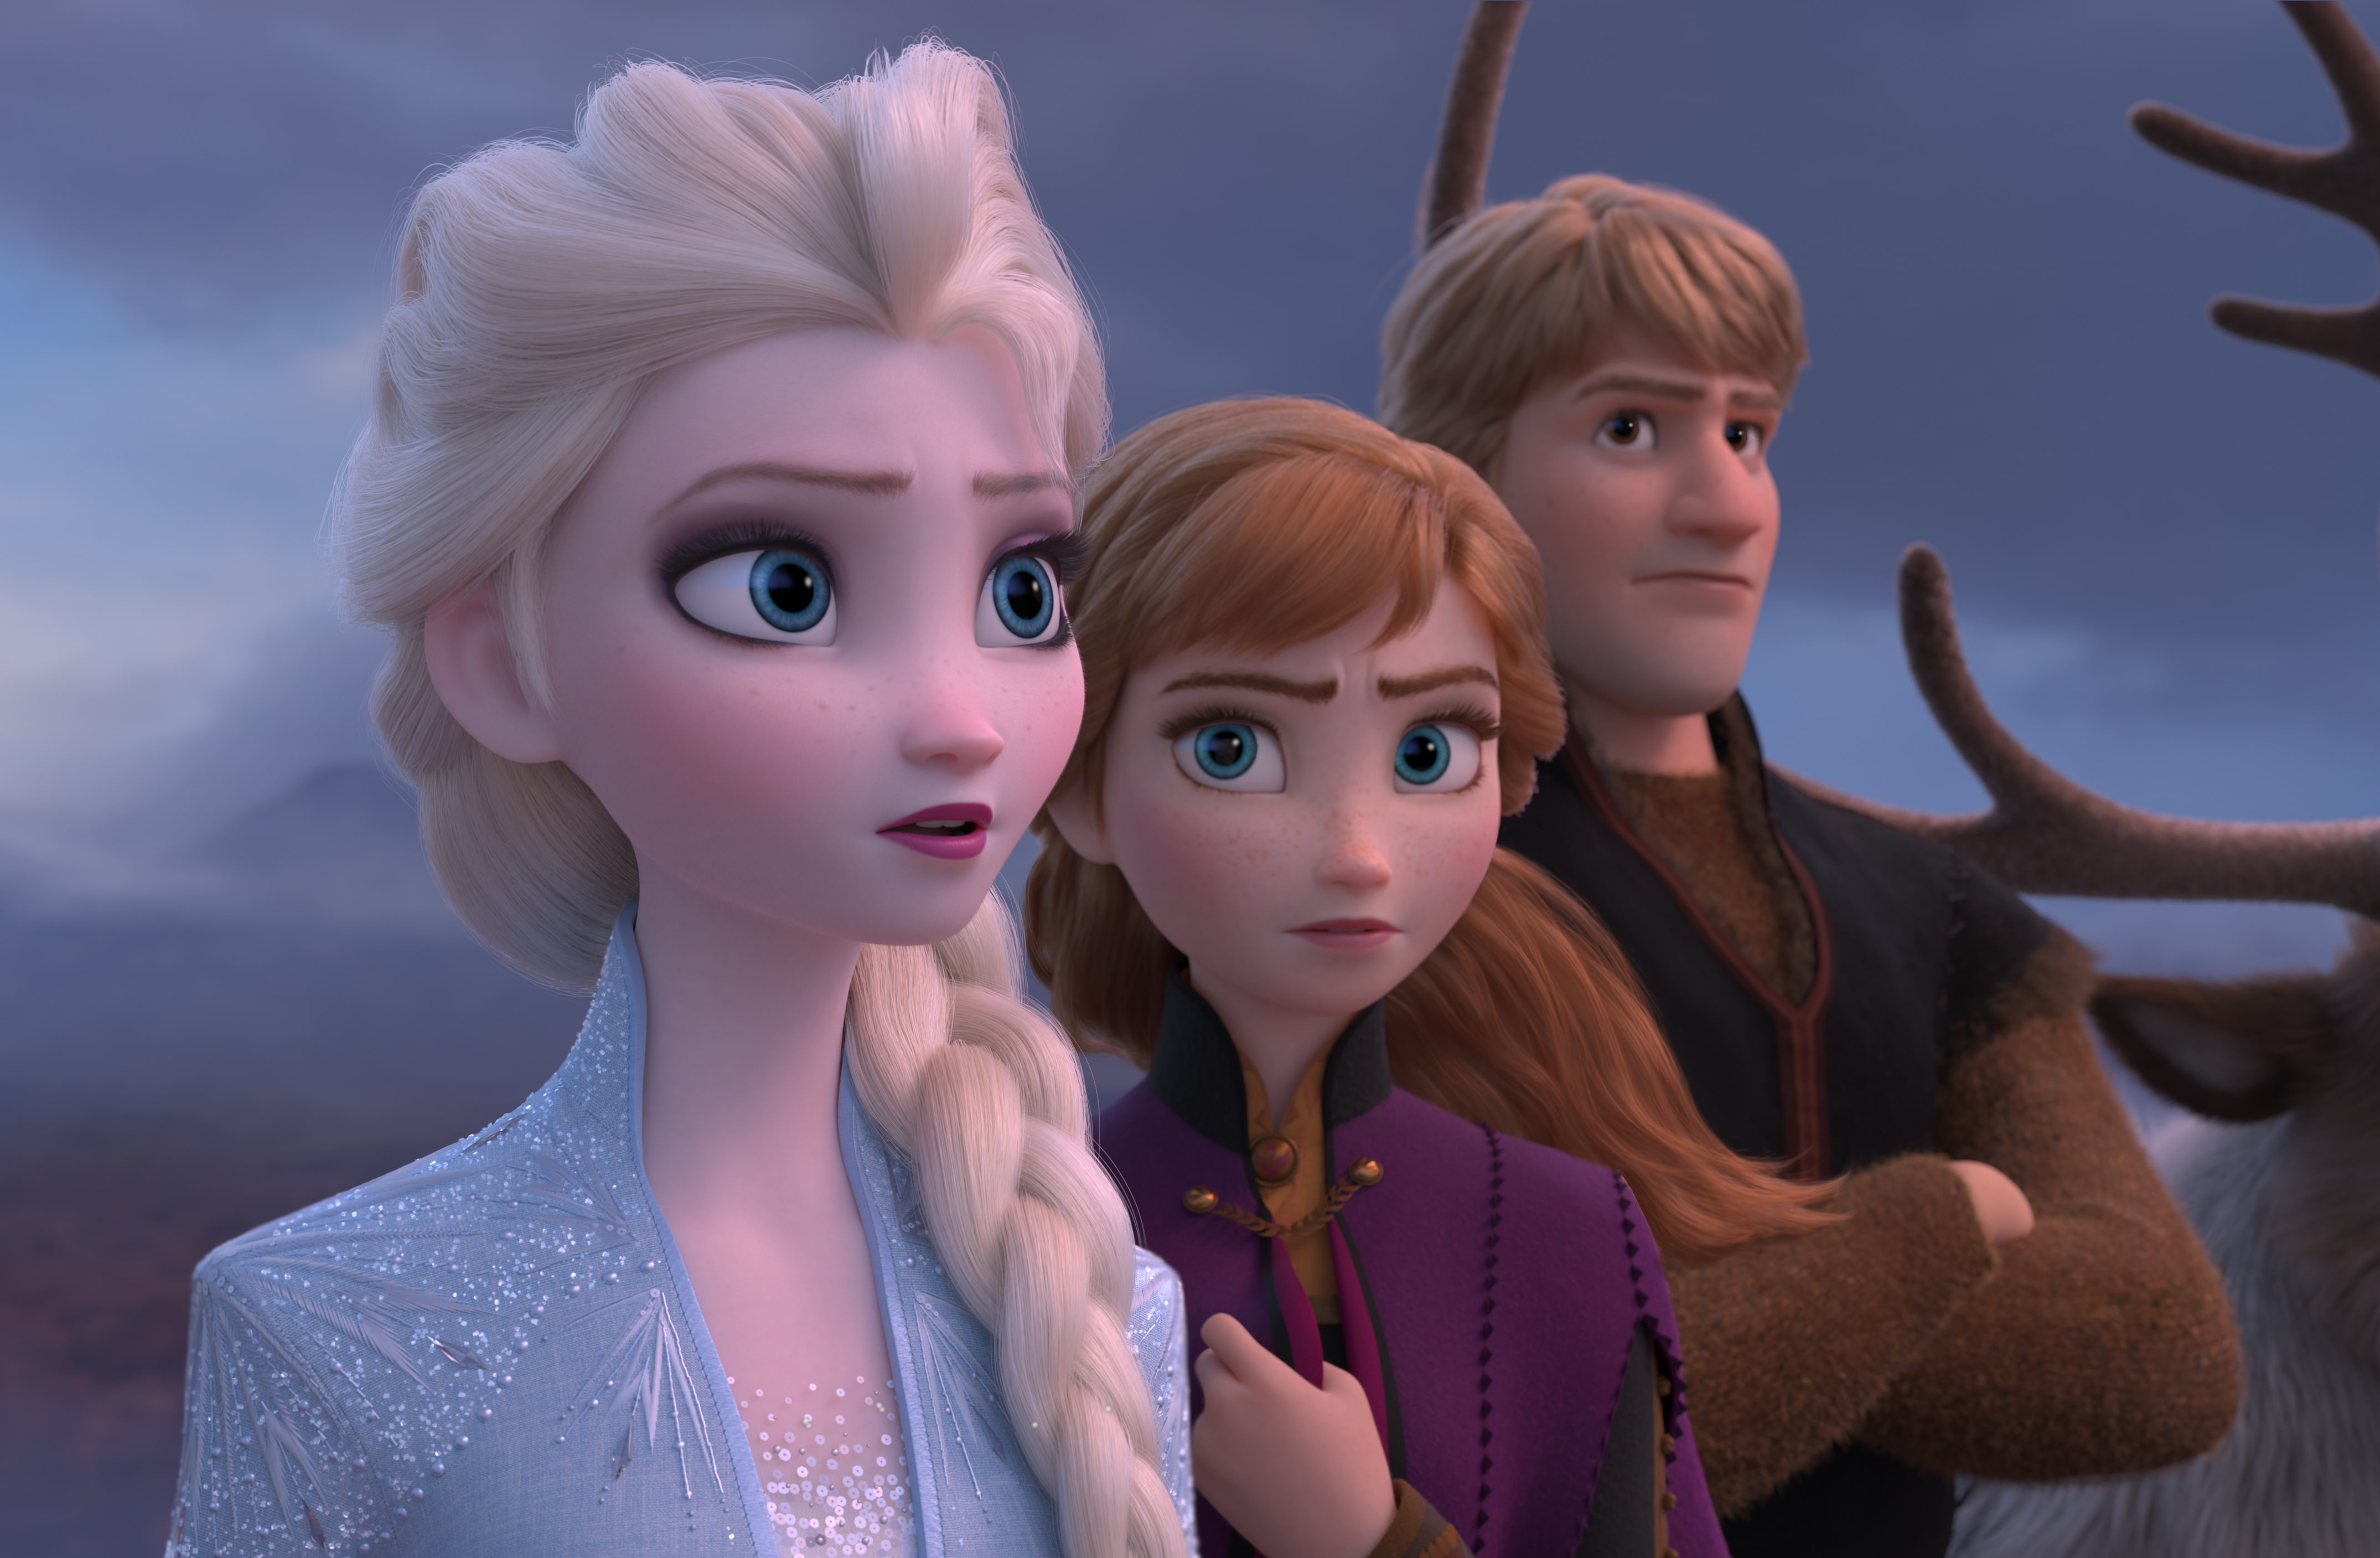 Frozen 2" is the Highest Grossing Animated Movie in History.